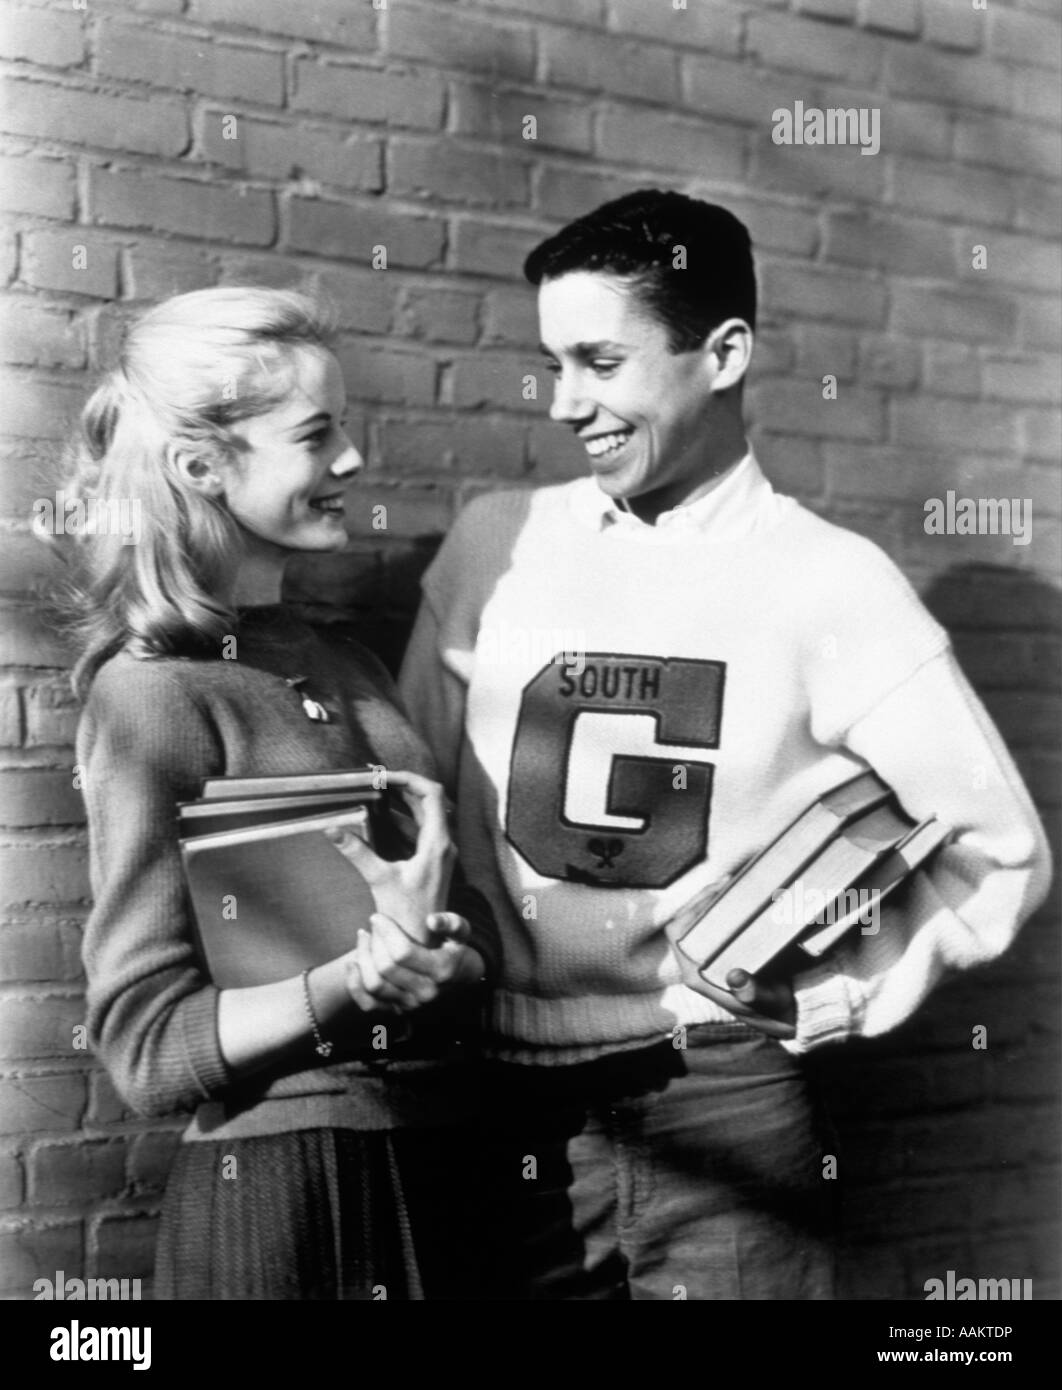 1950s TEENAGE COUPLE HOLDING BOOKS AND SMILING LEANING AGAINST WALL BOY WEARS VARSITY LETTER SWEATER Stock Photo